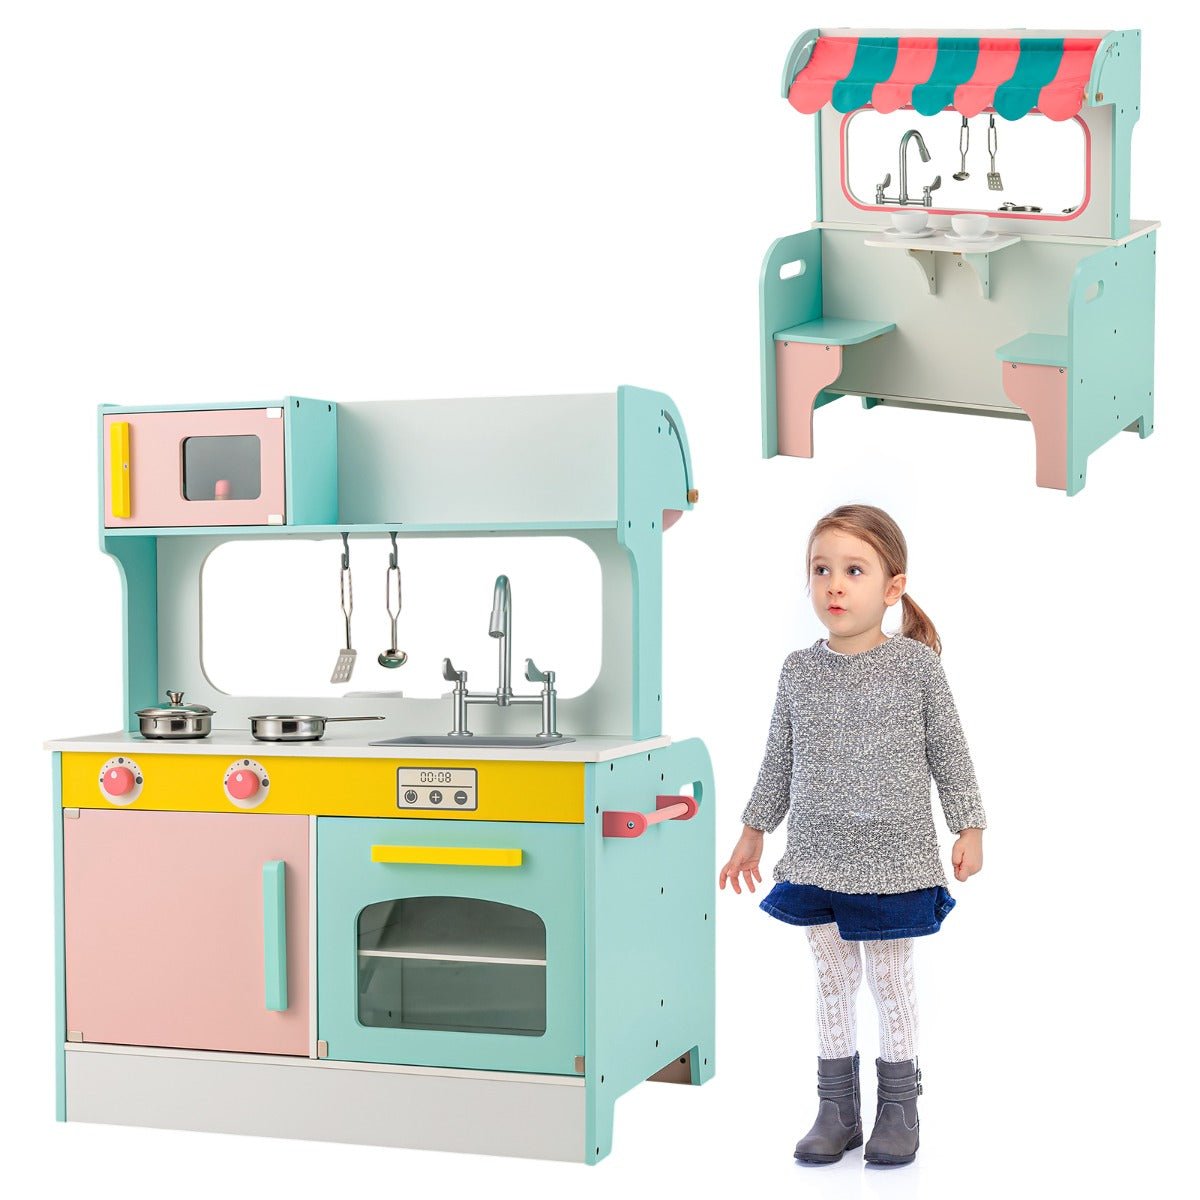 Imaginative Play: 2-in-1 Cooking Toy Set with Functional Faucet for Kids